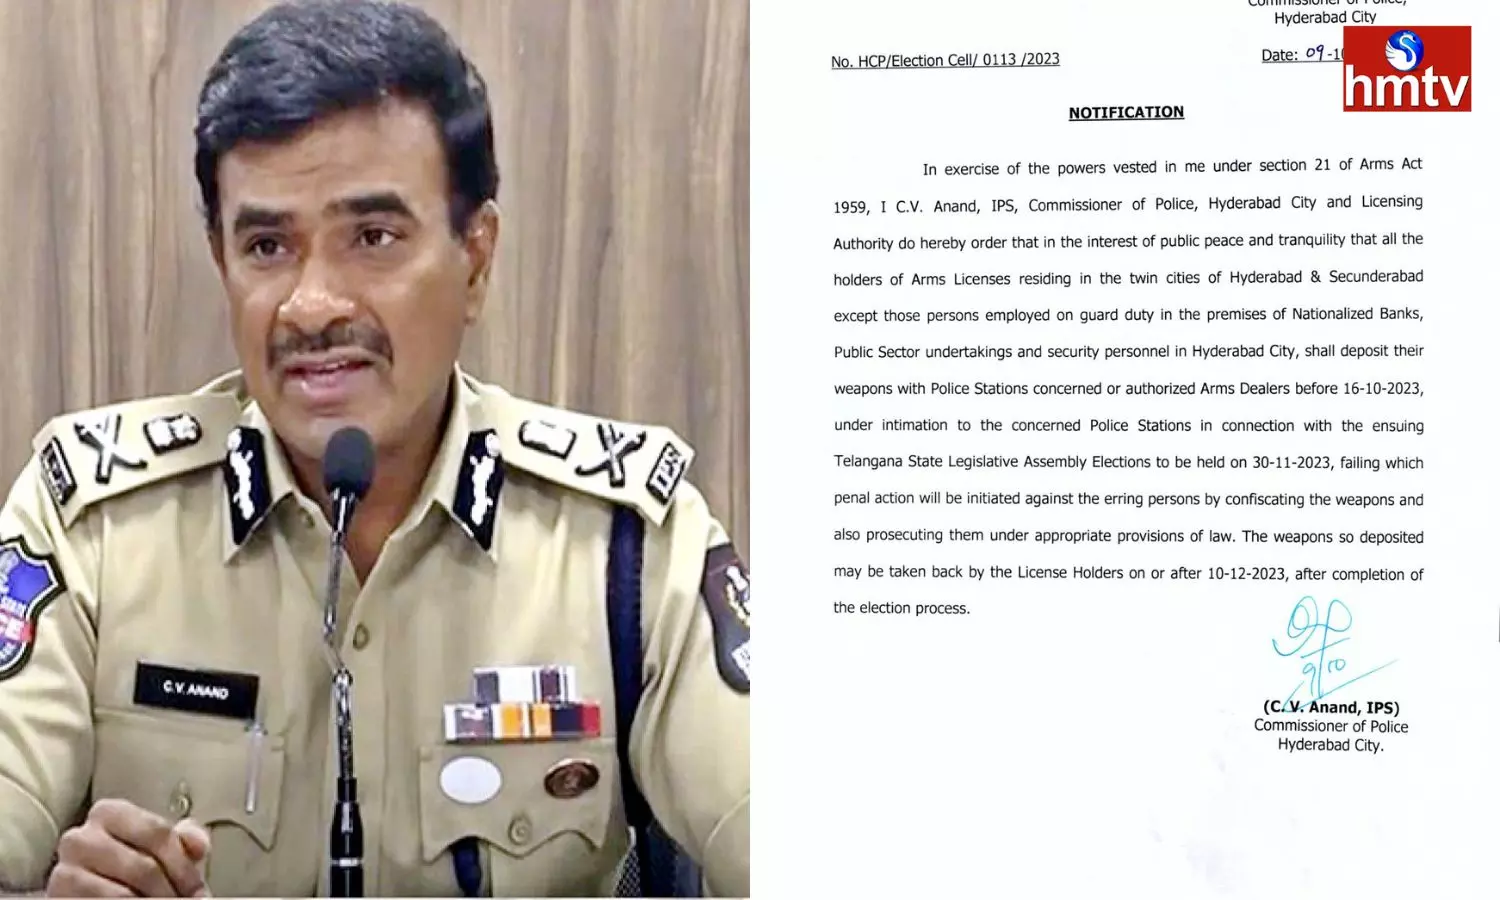 Hyderabad Police Commissioner CV Anand Orders To Deposit Weapons In The Wake Of Elections